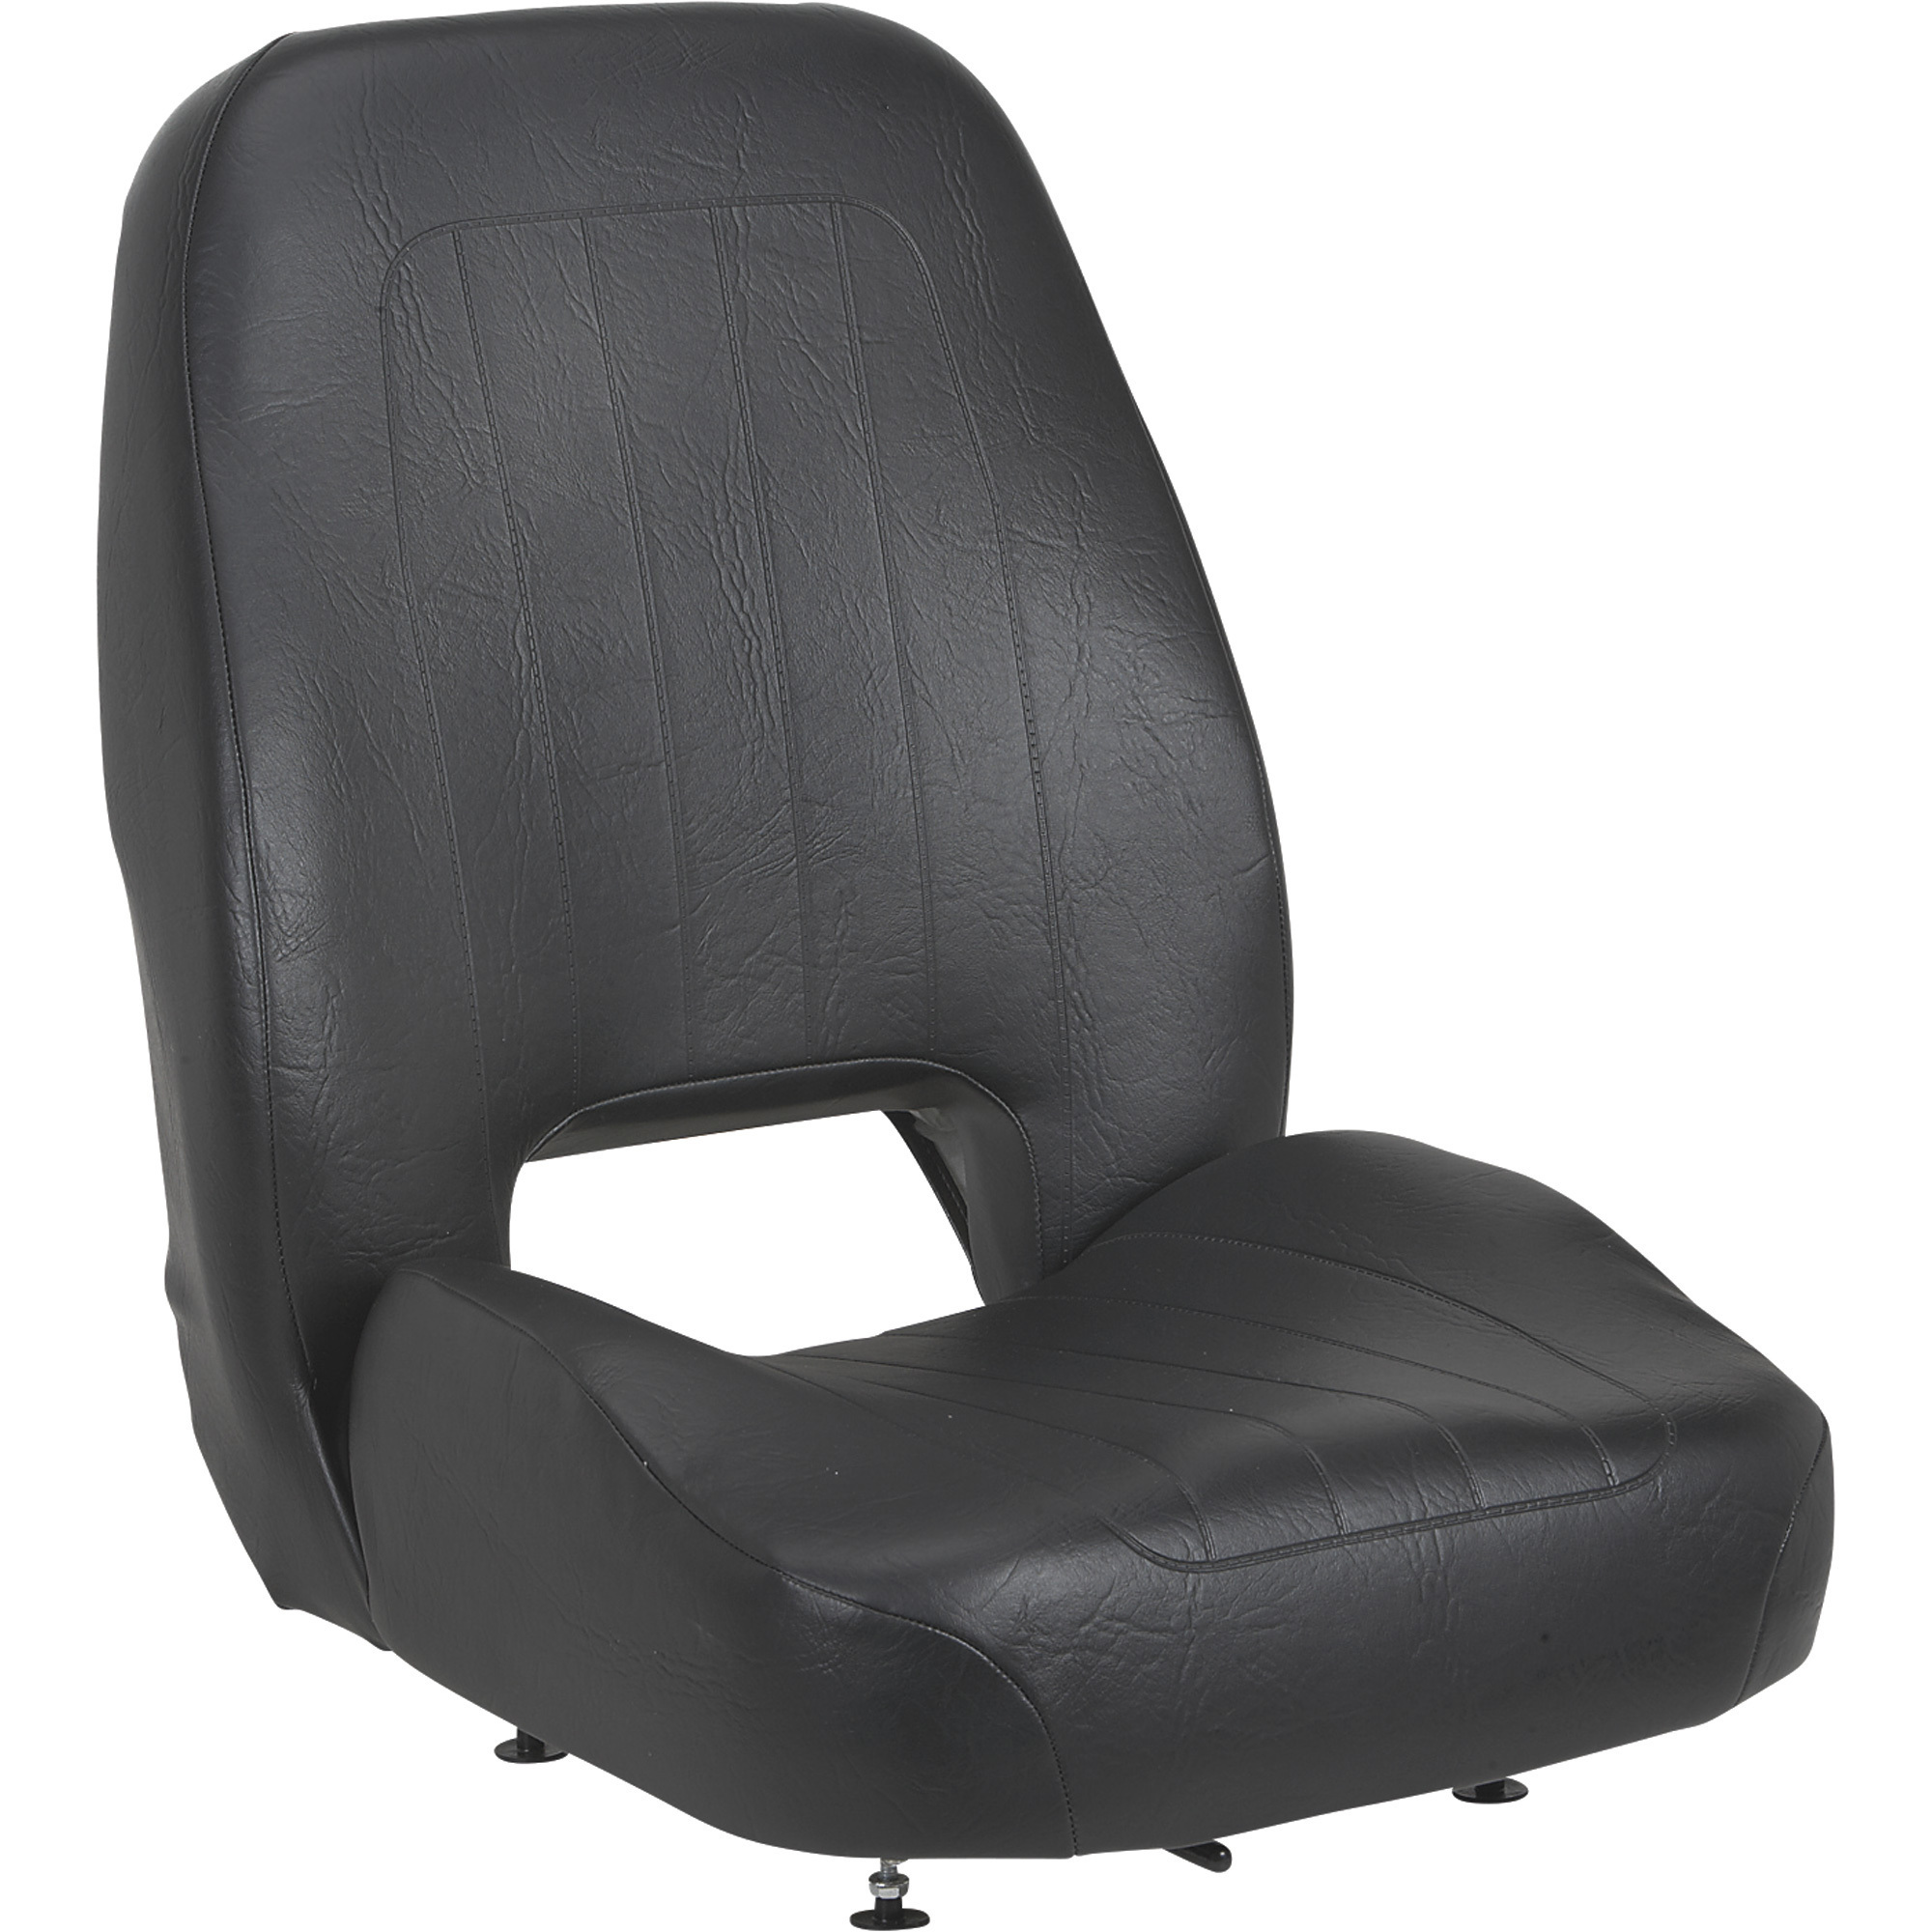 Wise Low Back Seat Assembly â Black, Model 1756-R100